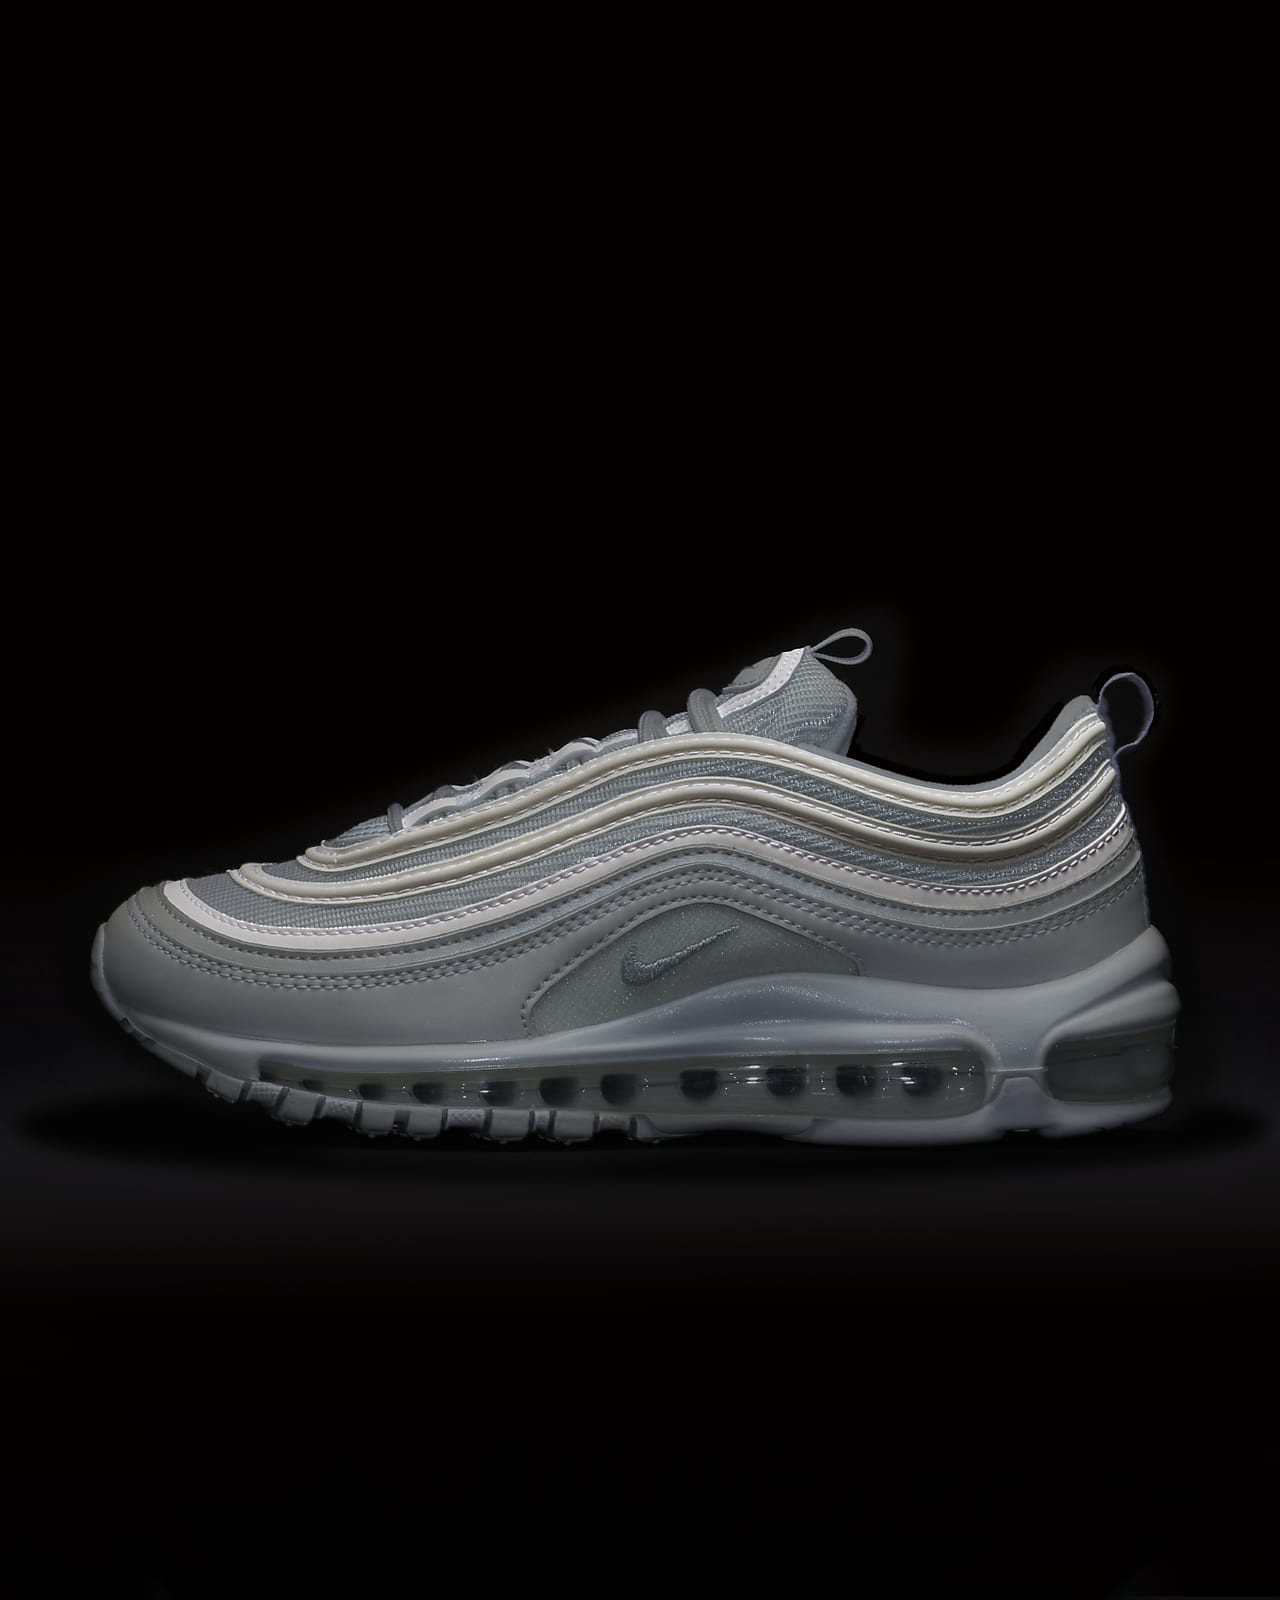 97 grey and white